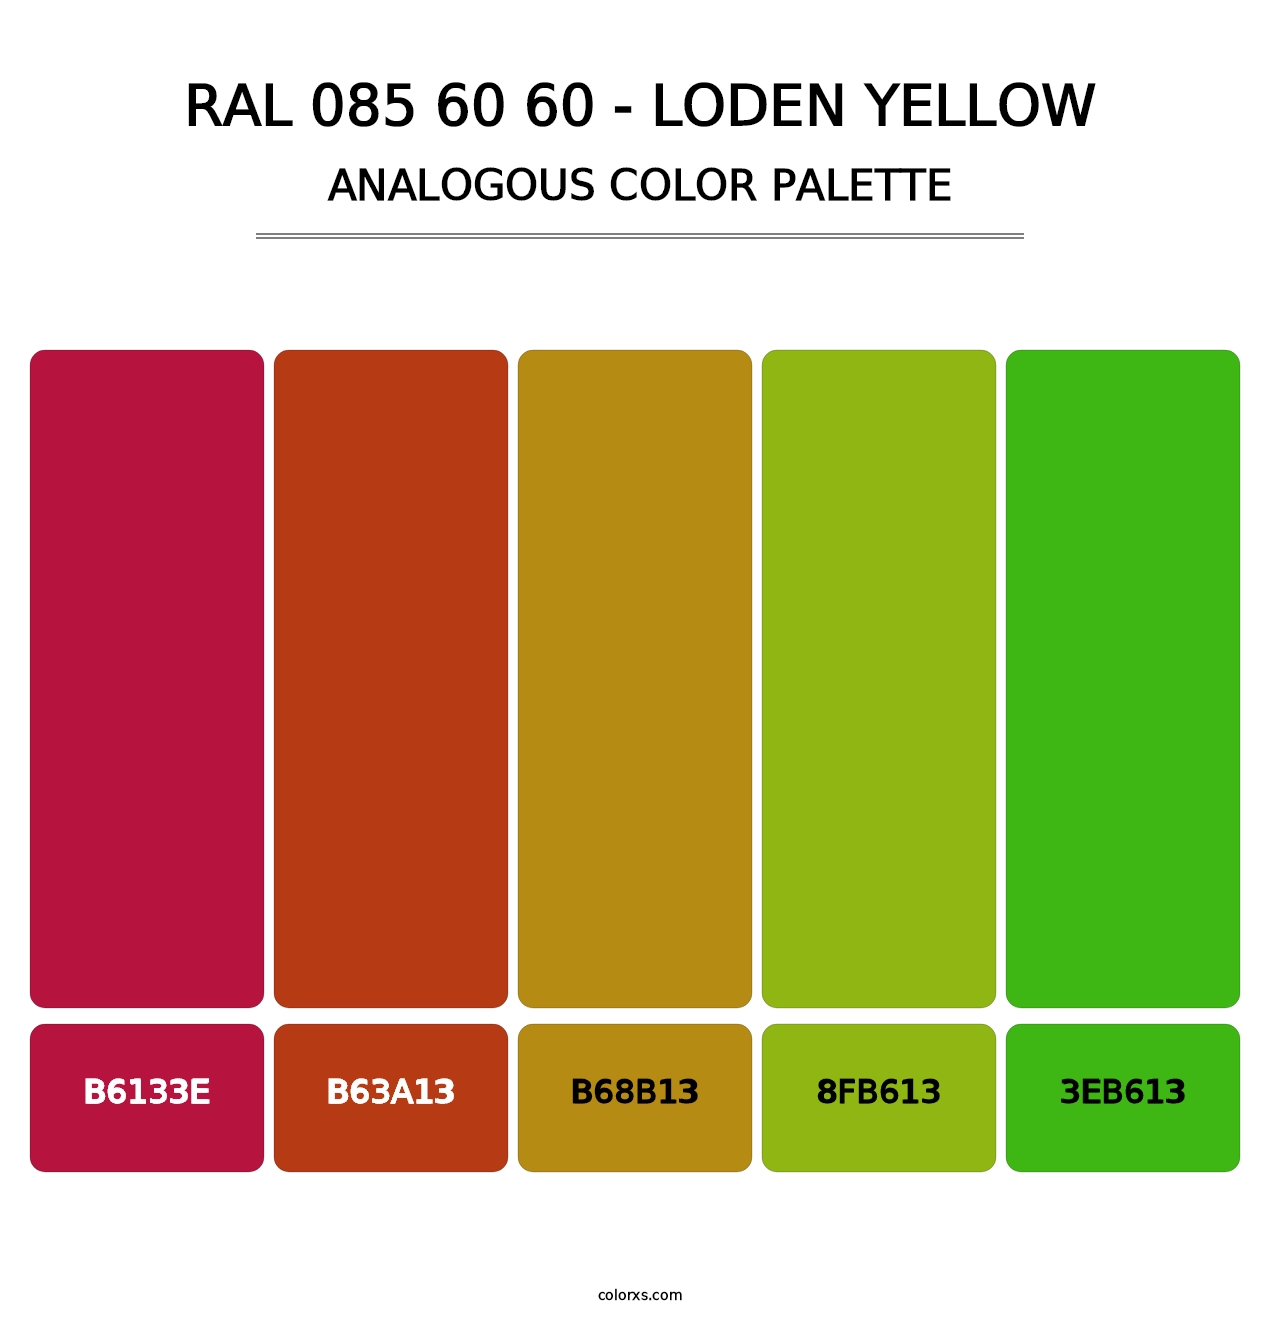 RAL 085 60 60 - Loden Yellow - Analogous Color Palette